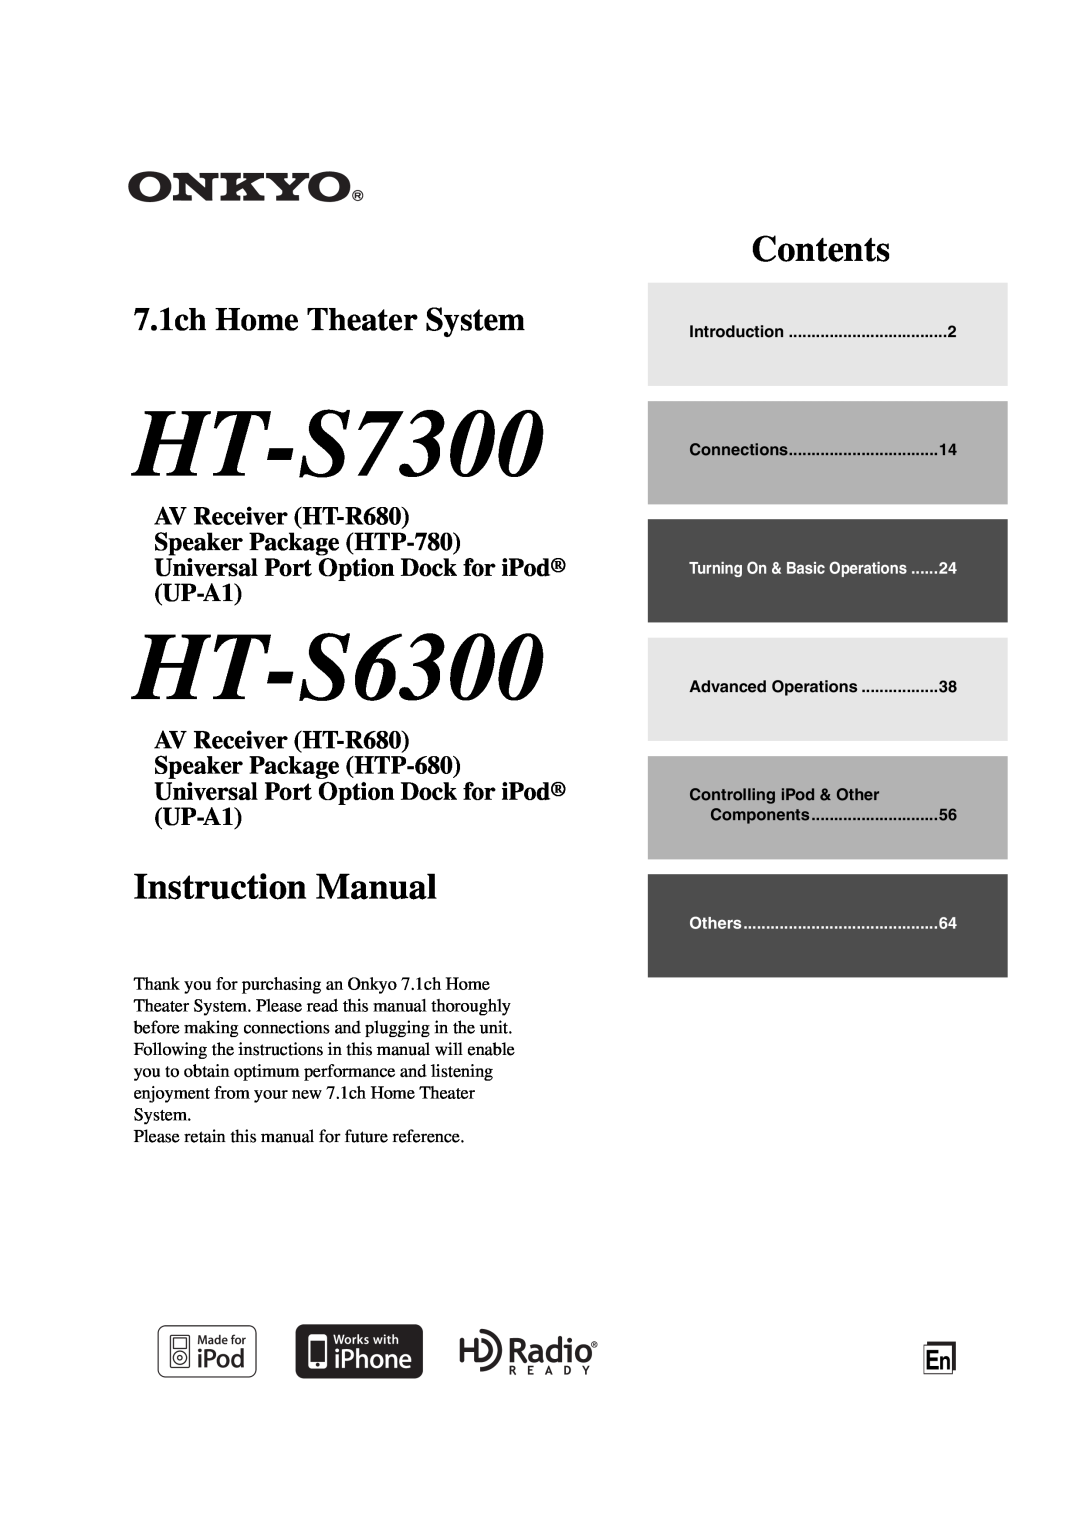 Onkyo HT-S7300 instruction manual HT-S6300, Contents, 7.1ch Home Theater System 